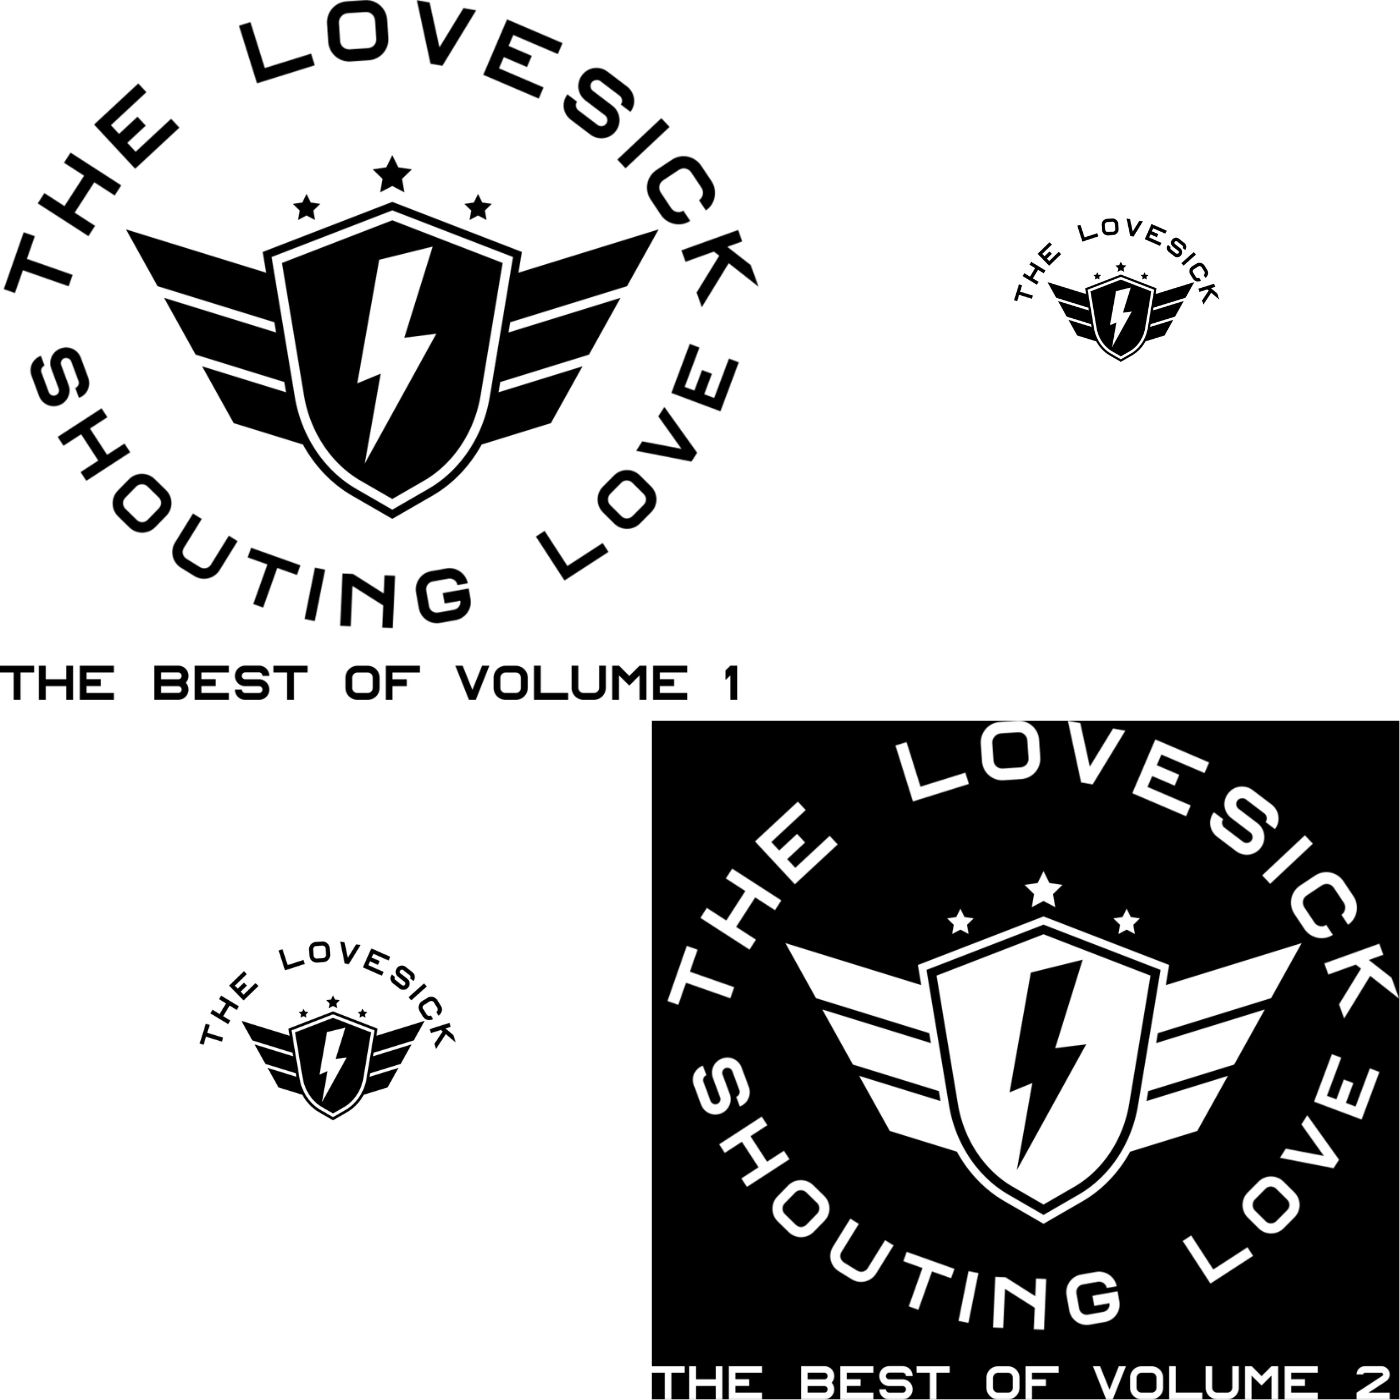 The Lovesick - Deluxe Shouting Love The Best of Volume 1 & 2